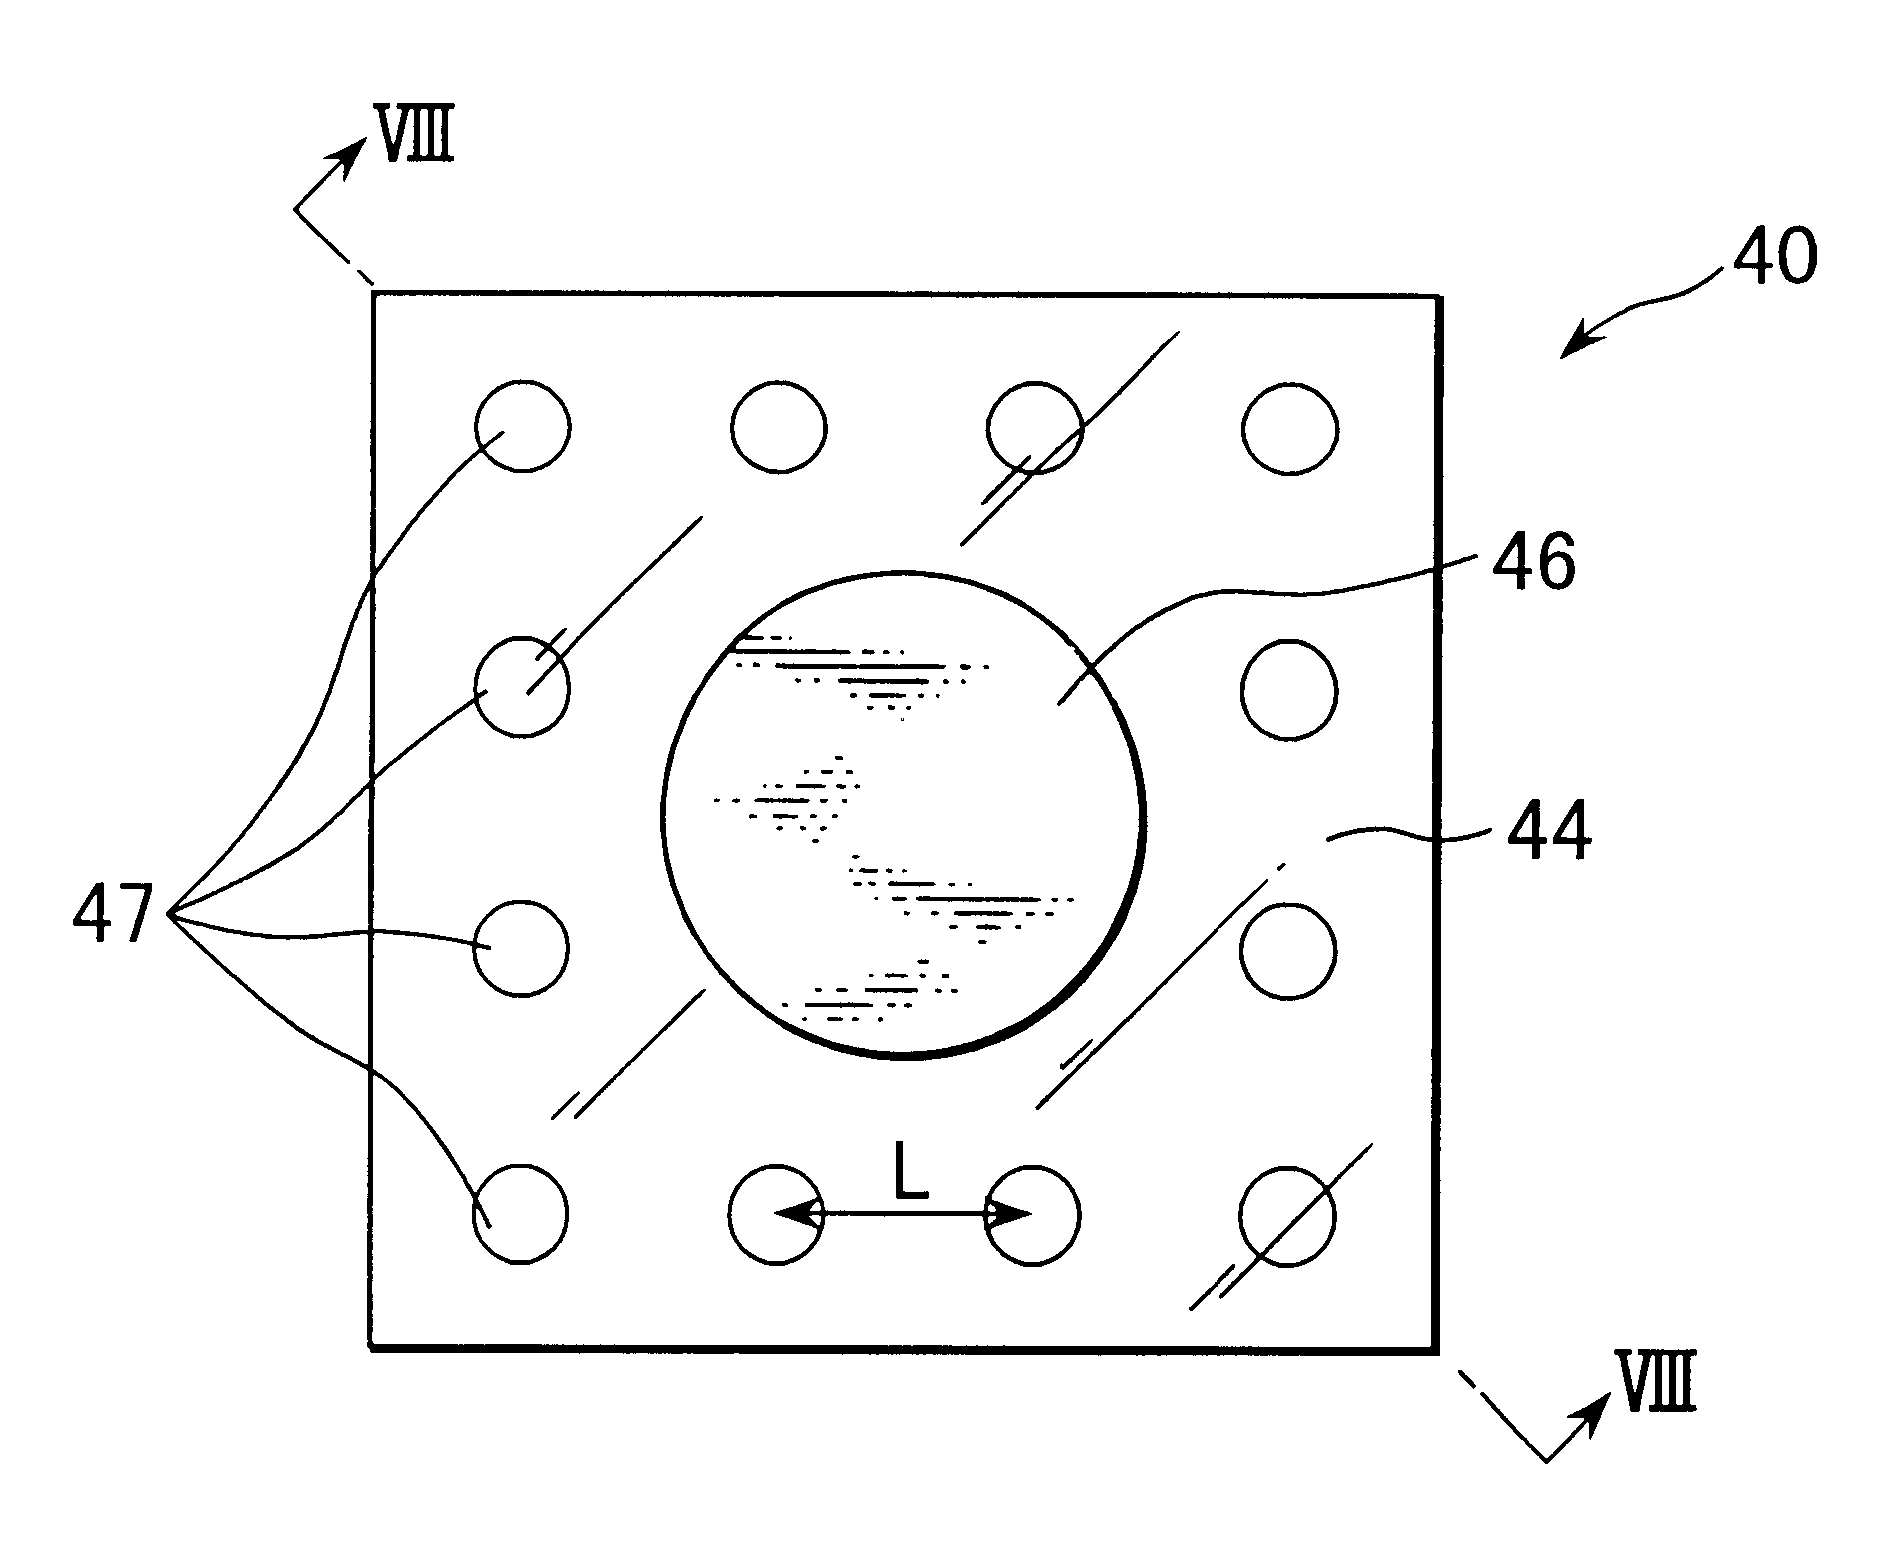 Semiconductor light-emitting device, electrode for the device, method for fabricating the electrode, LED lamp using the device, and light source using the LED lamp